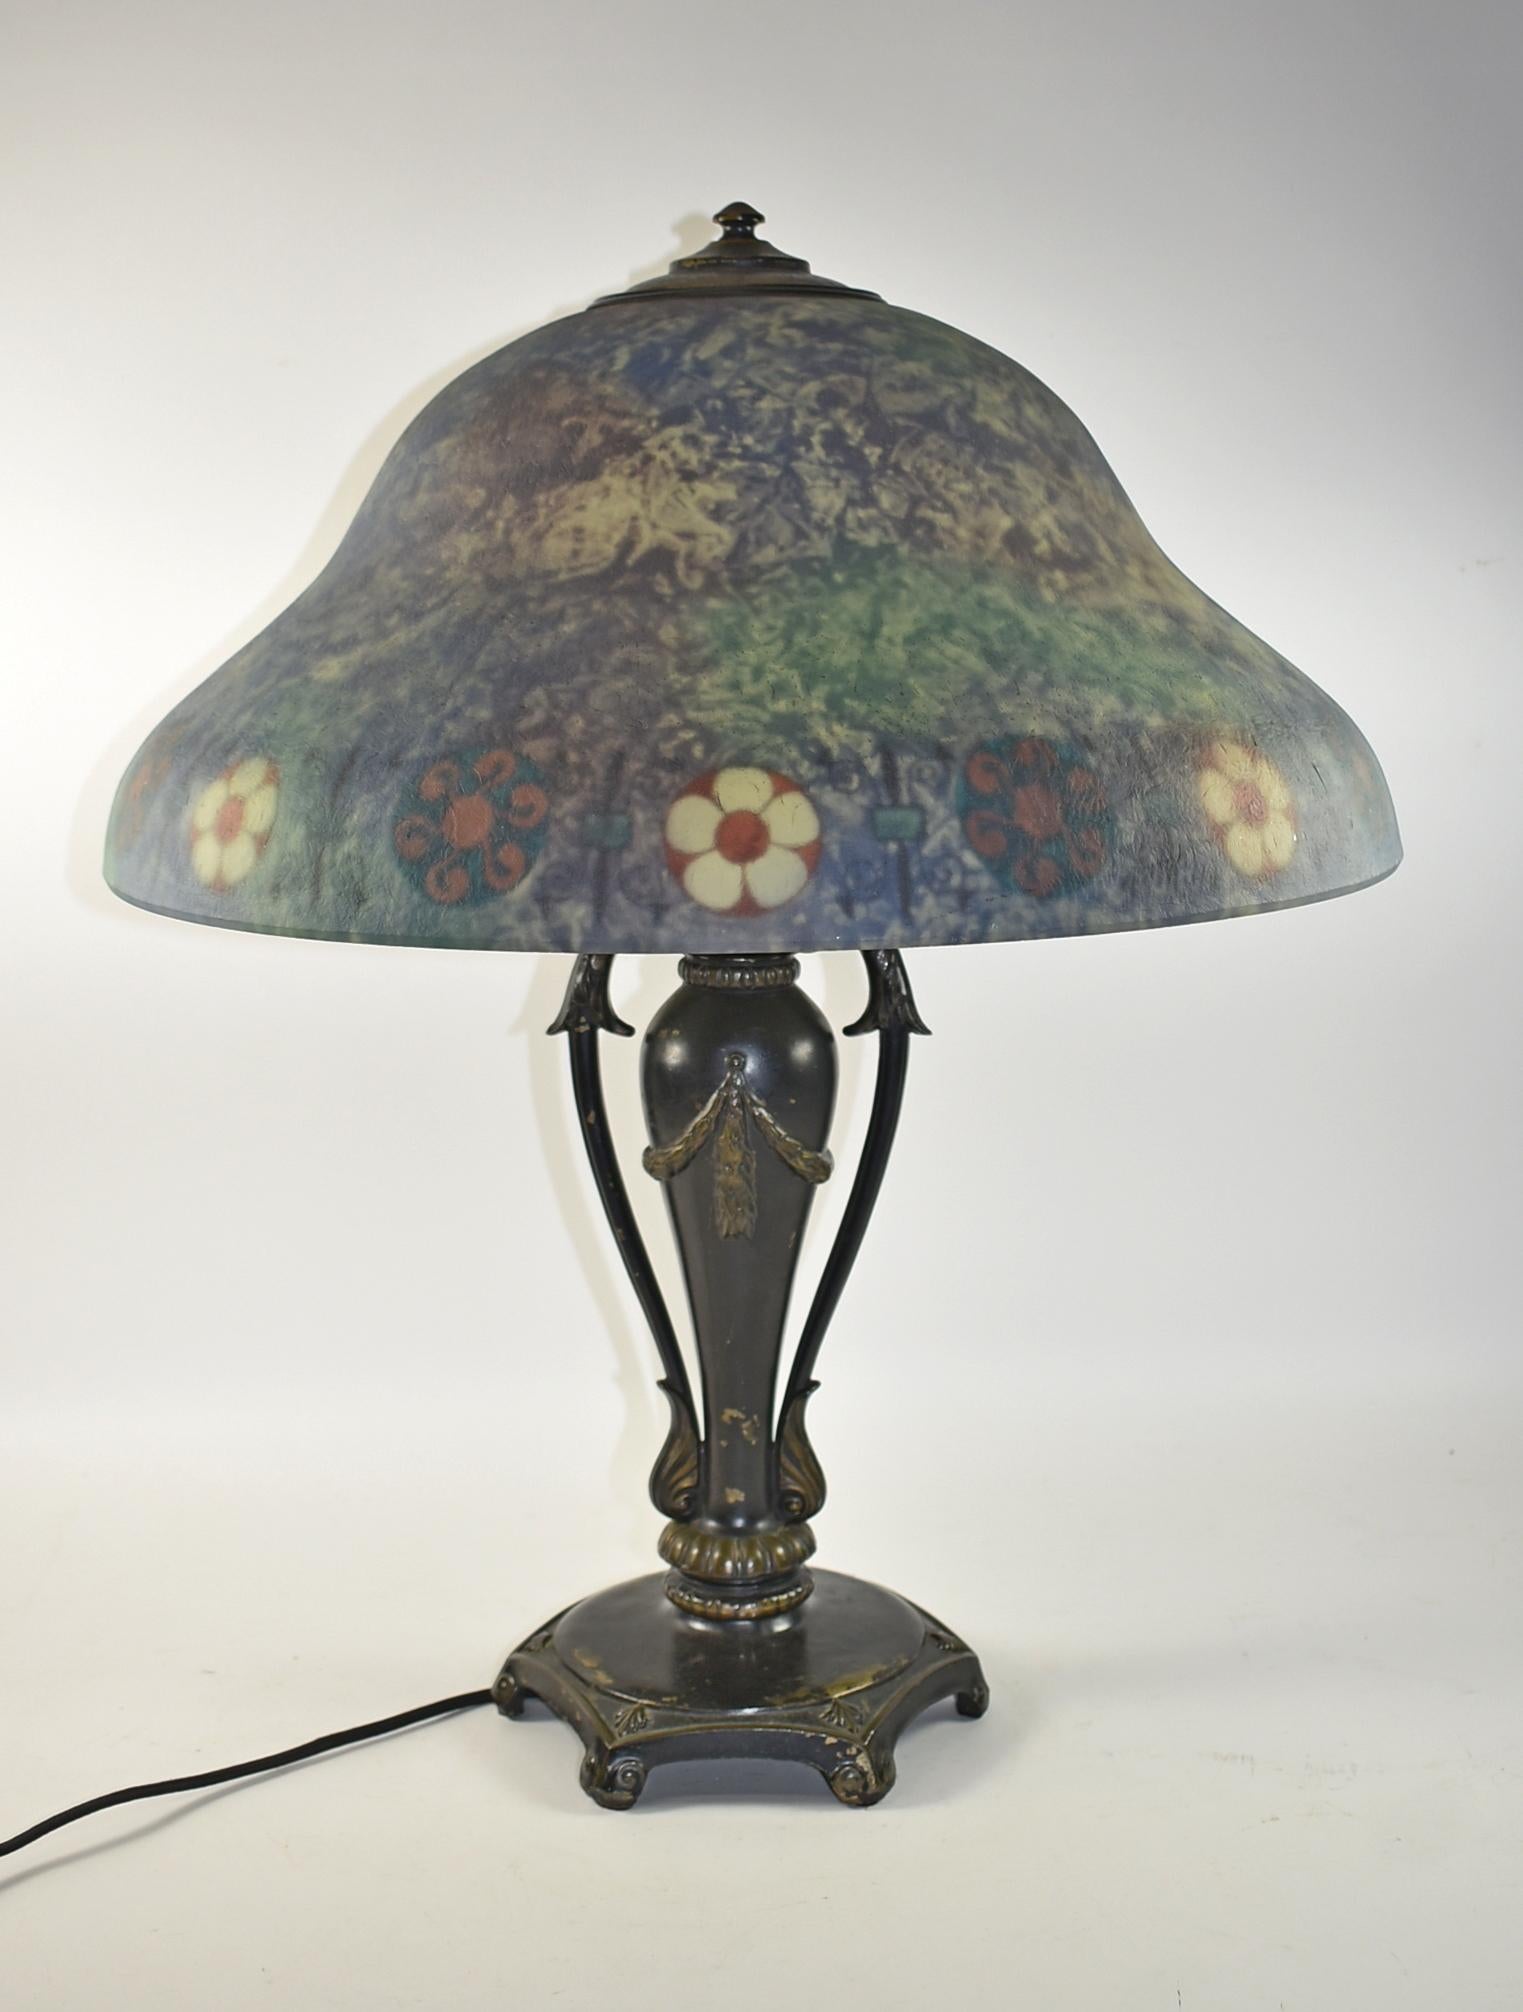 Reverse Painted Classique Floral Table Lamp, circa 1920s. Blue and green reverse painted shade with a floral border. Signed on edge with 